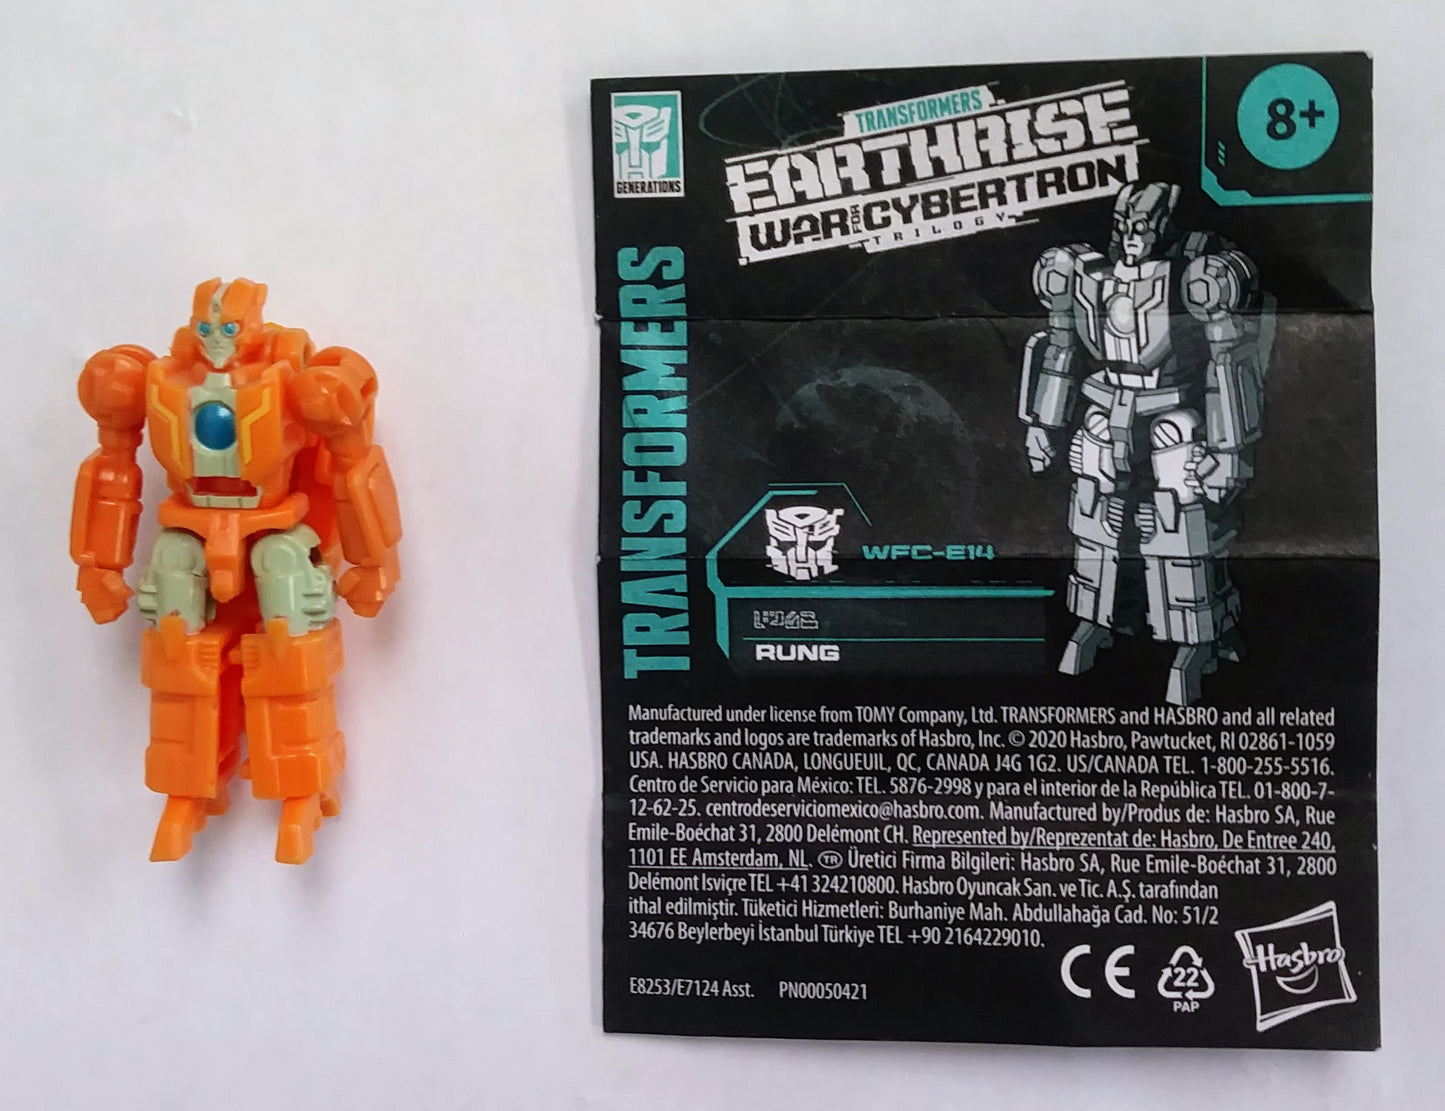 Transformers Micro Masters figure - Autobot Rung (Earthrise)